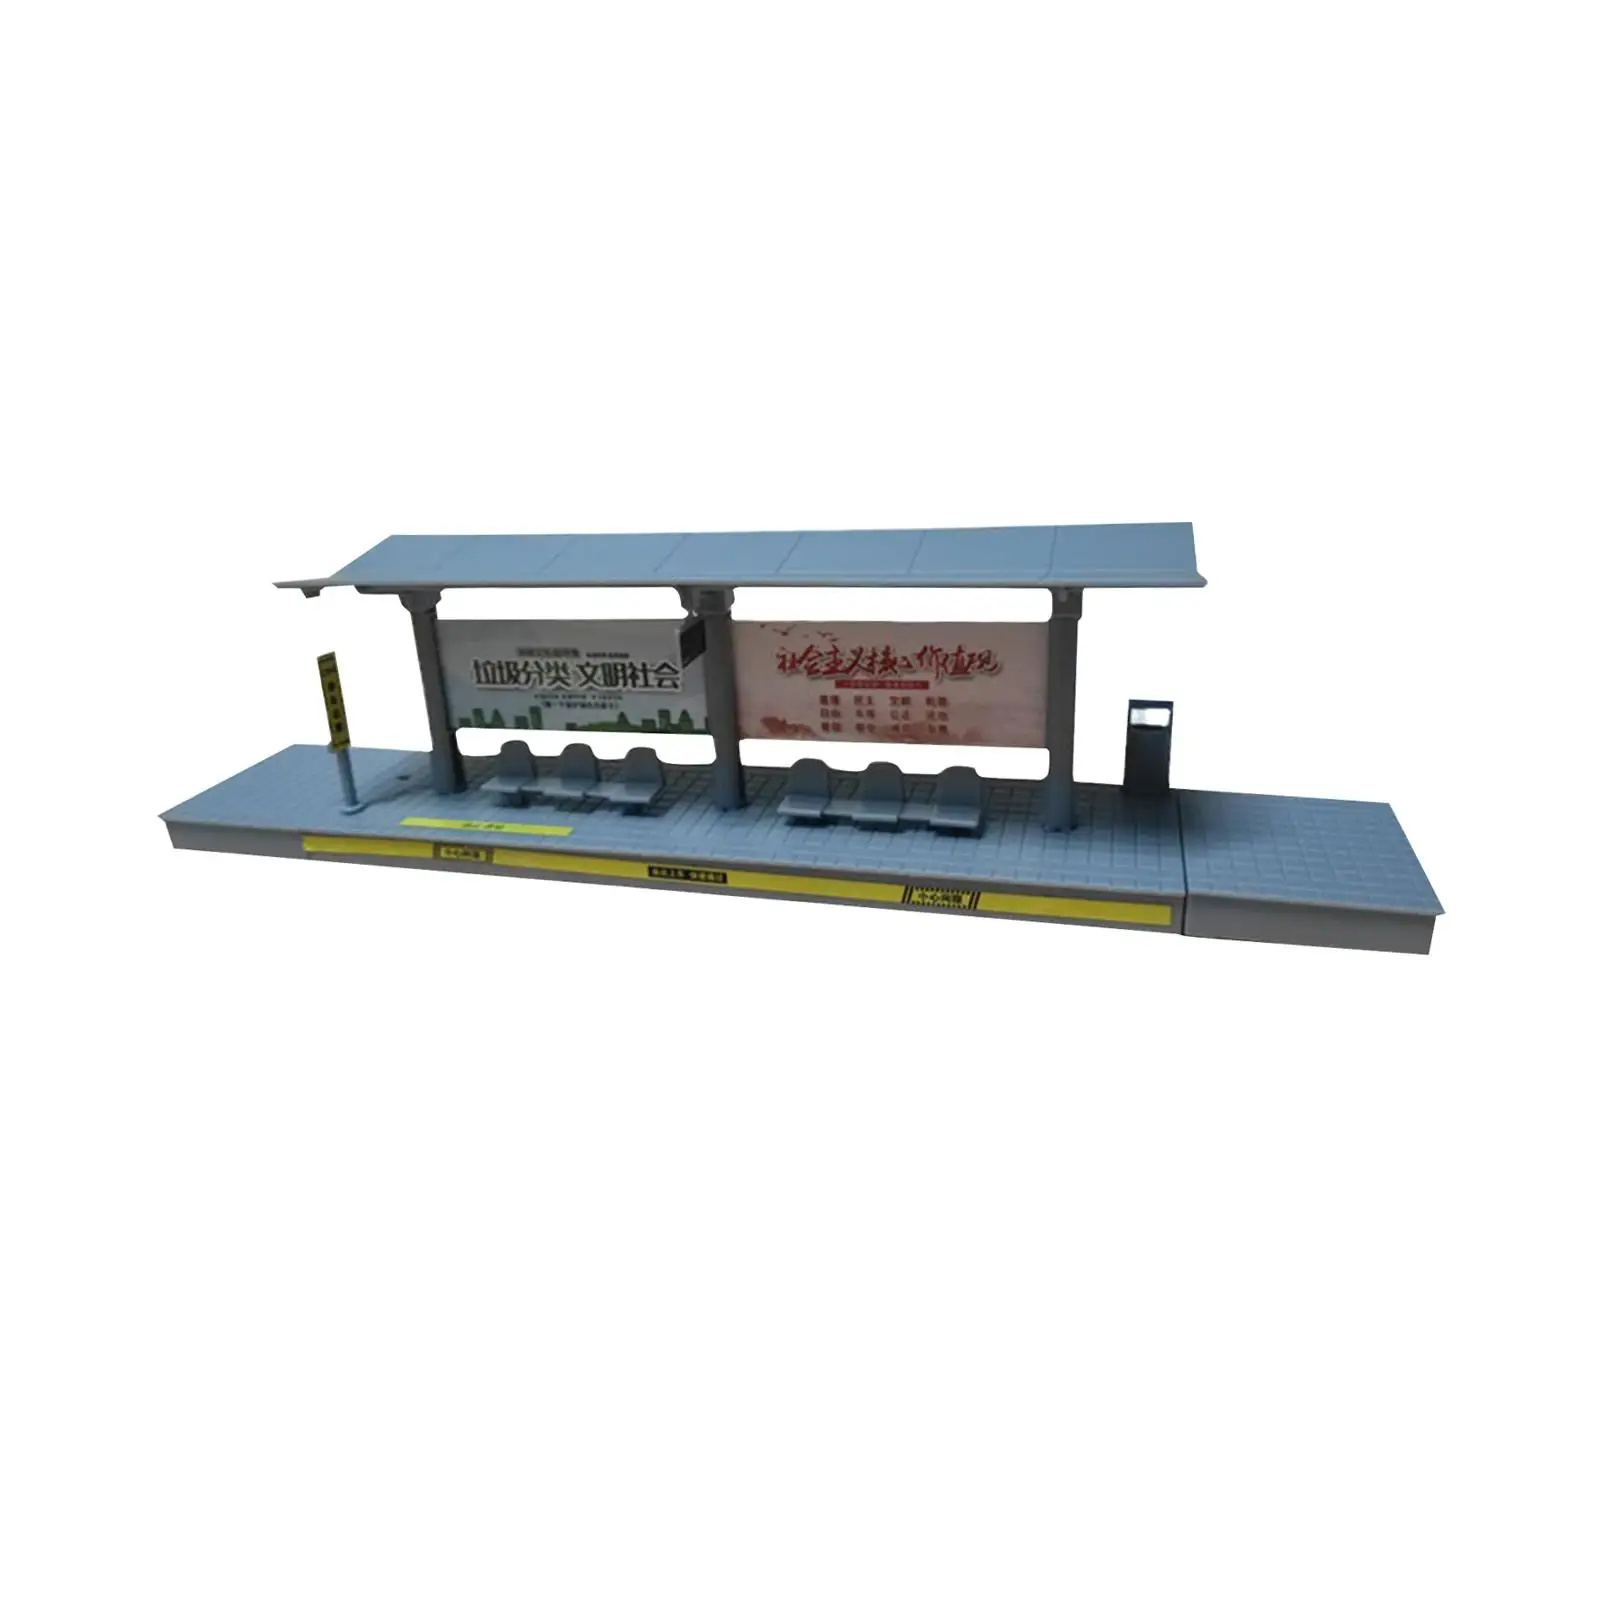 1/64 Scale Bus Waiting Stop Collection Ornament Miniature Building Model for Sand Table Model Railway Micro Landscape Decoration